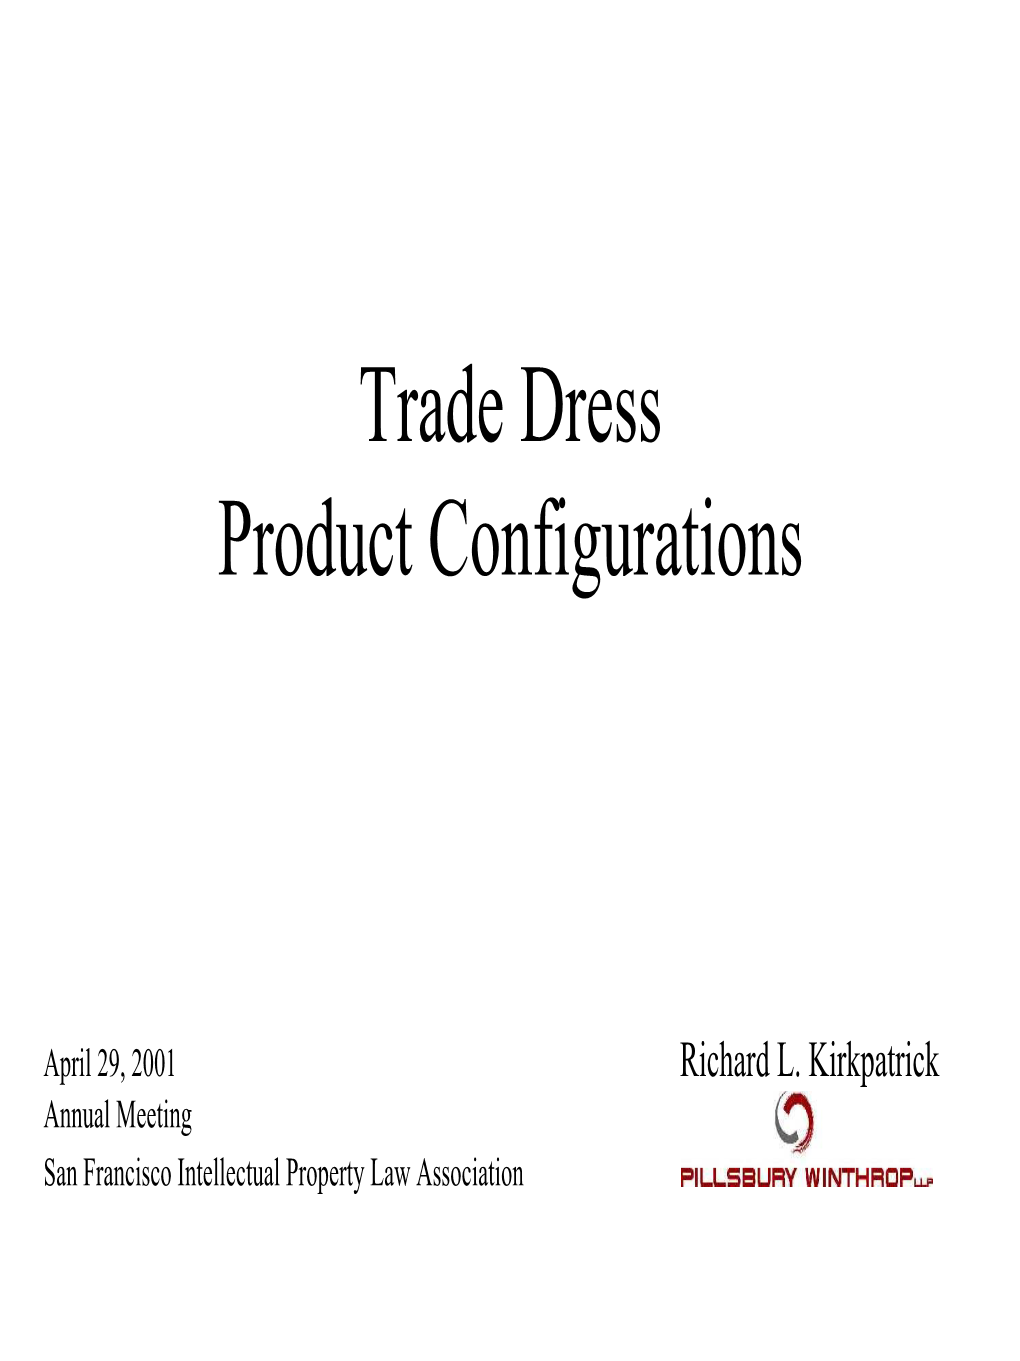 Trade Dress Product Configurations